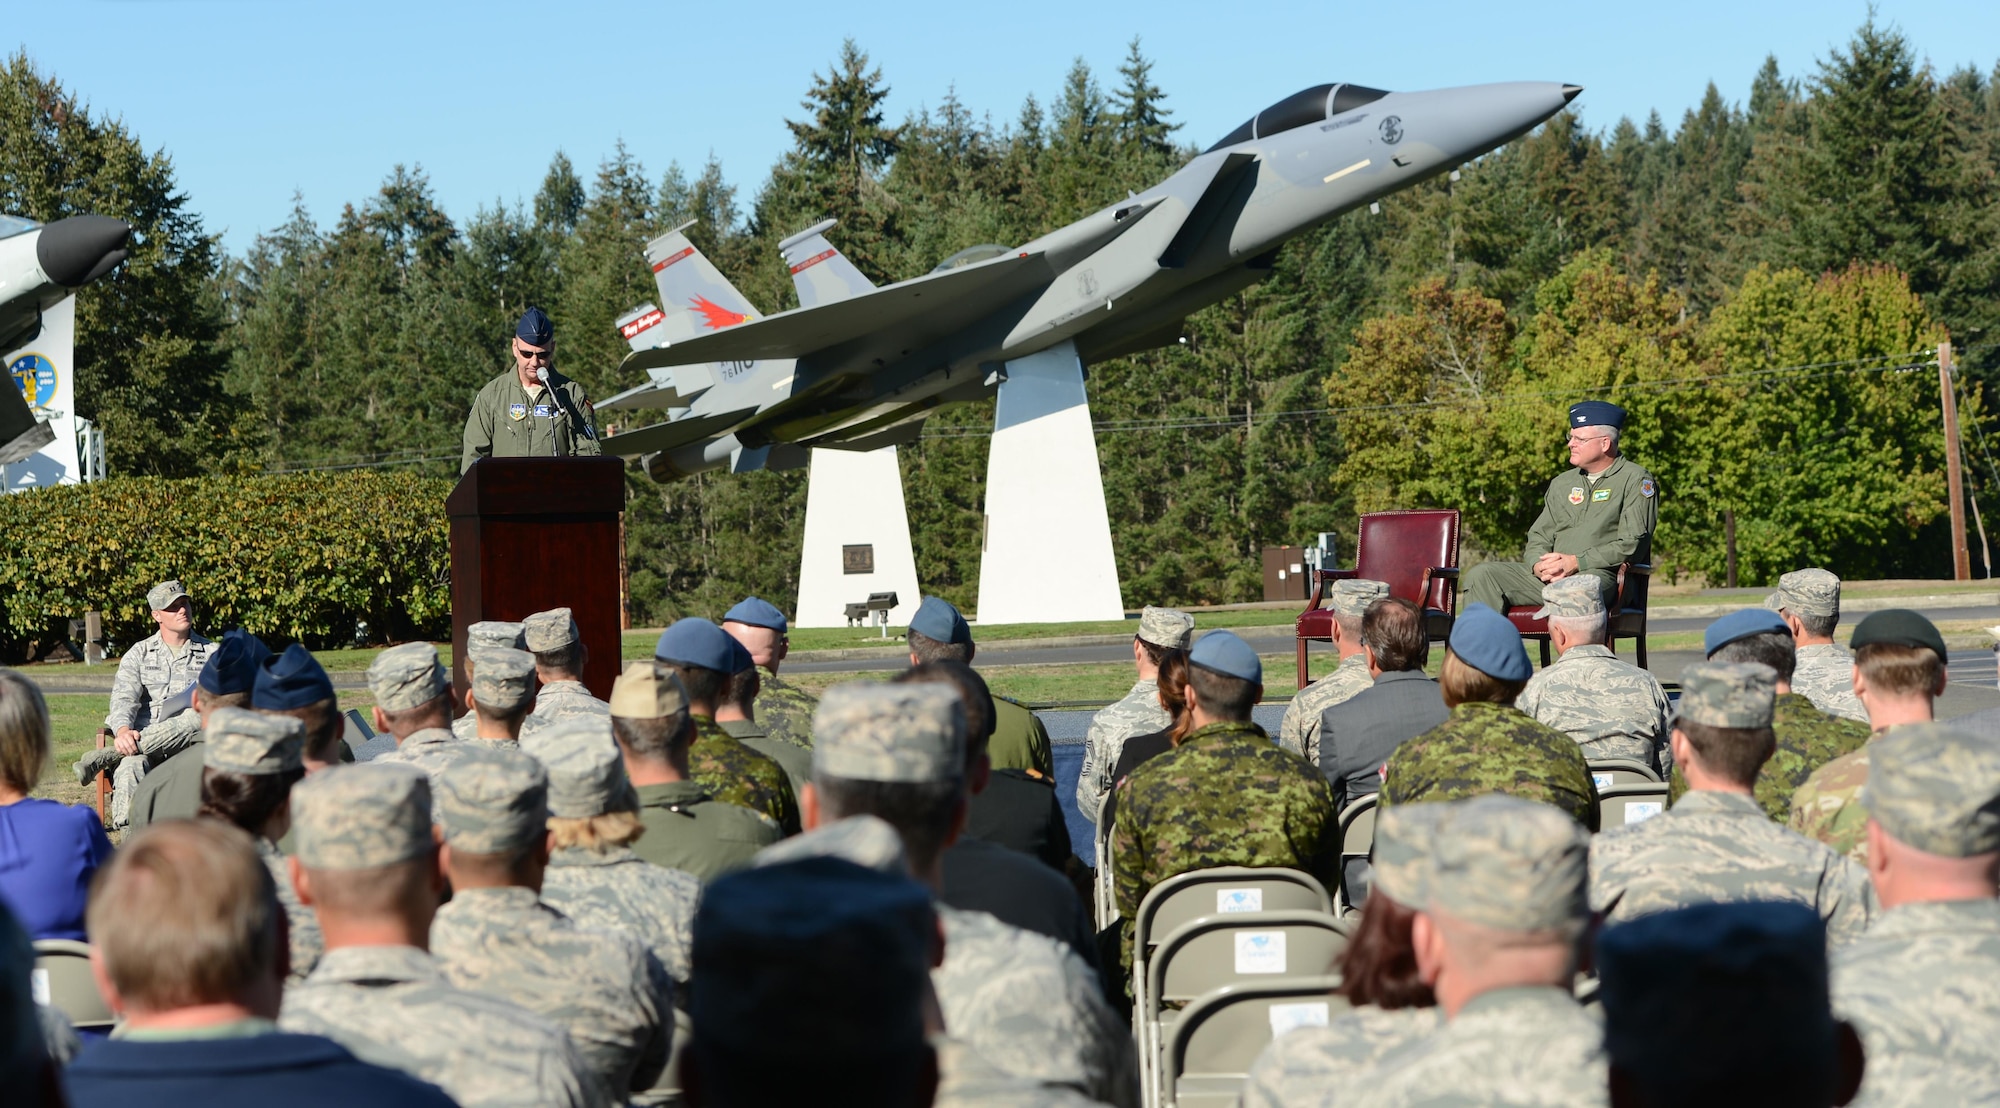 The Western Air Defense Sector holds a formal dedication ceremony Sept. 13 at the WADS Air Park for a McDonnell Douglas F-15A Eagle.  The guest speaker, Col. Robert Hehemann, the Individual Mobilization Augmentee assigned to the NORAD/US NORTHERN Command J3 Operations Division, highlights the F-15 capabilities and its role in NORAD air defense.  The WADS has been guarding America's skies in the same building 24/7 since 1960 and regularly uses F-15 alert aircraft to perform its mission. (U.S. Air Force photo by Senior Airman Jacob Jimenez)